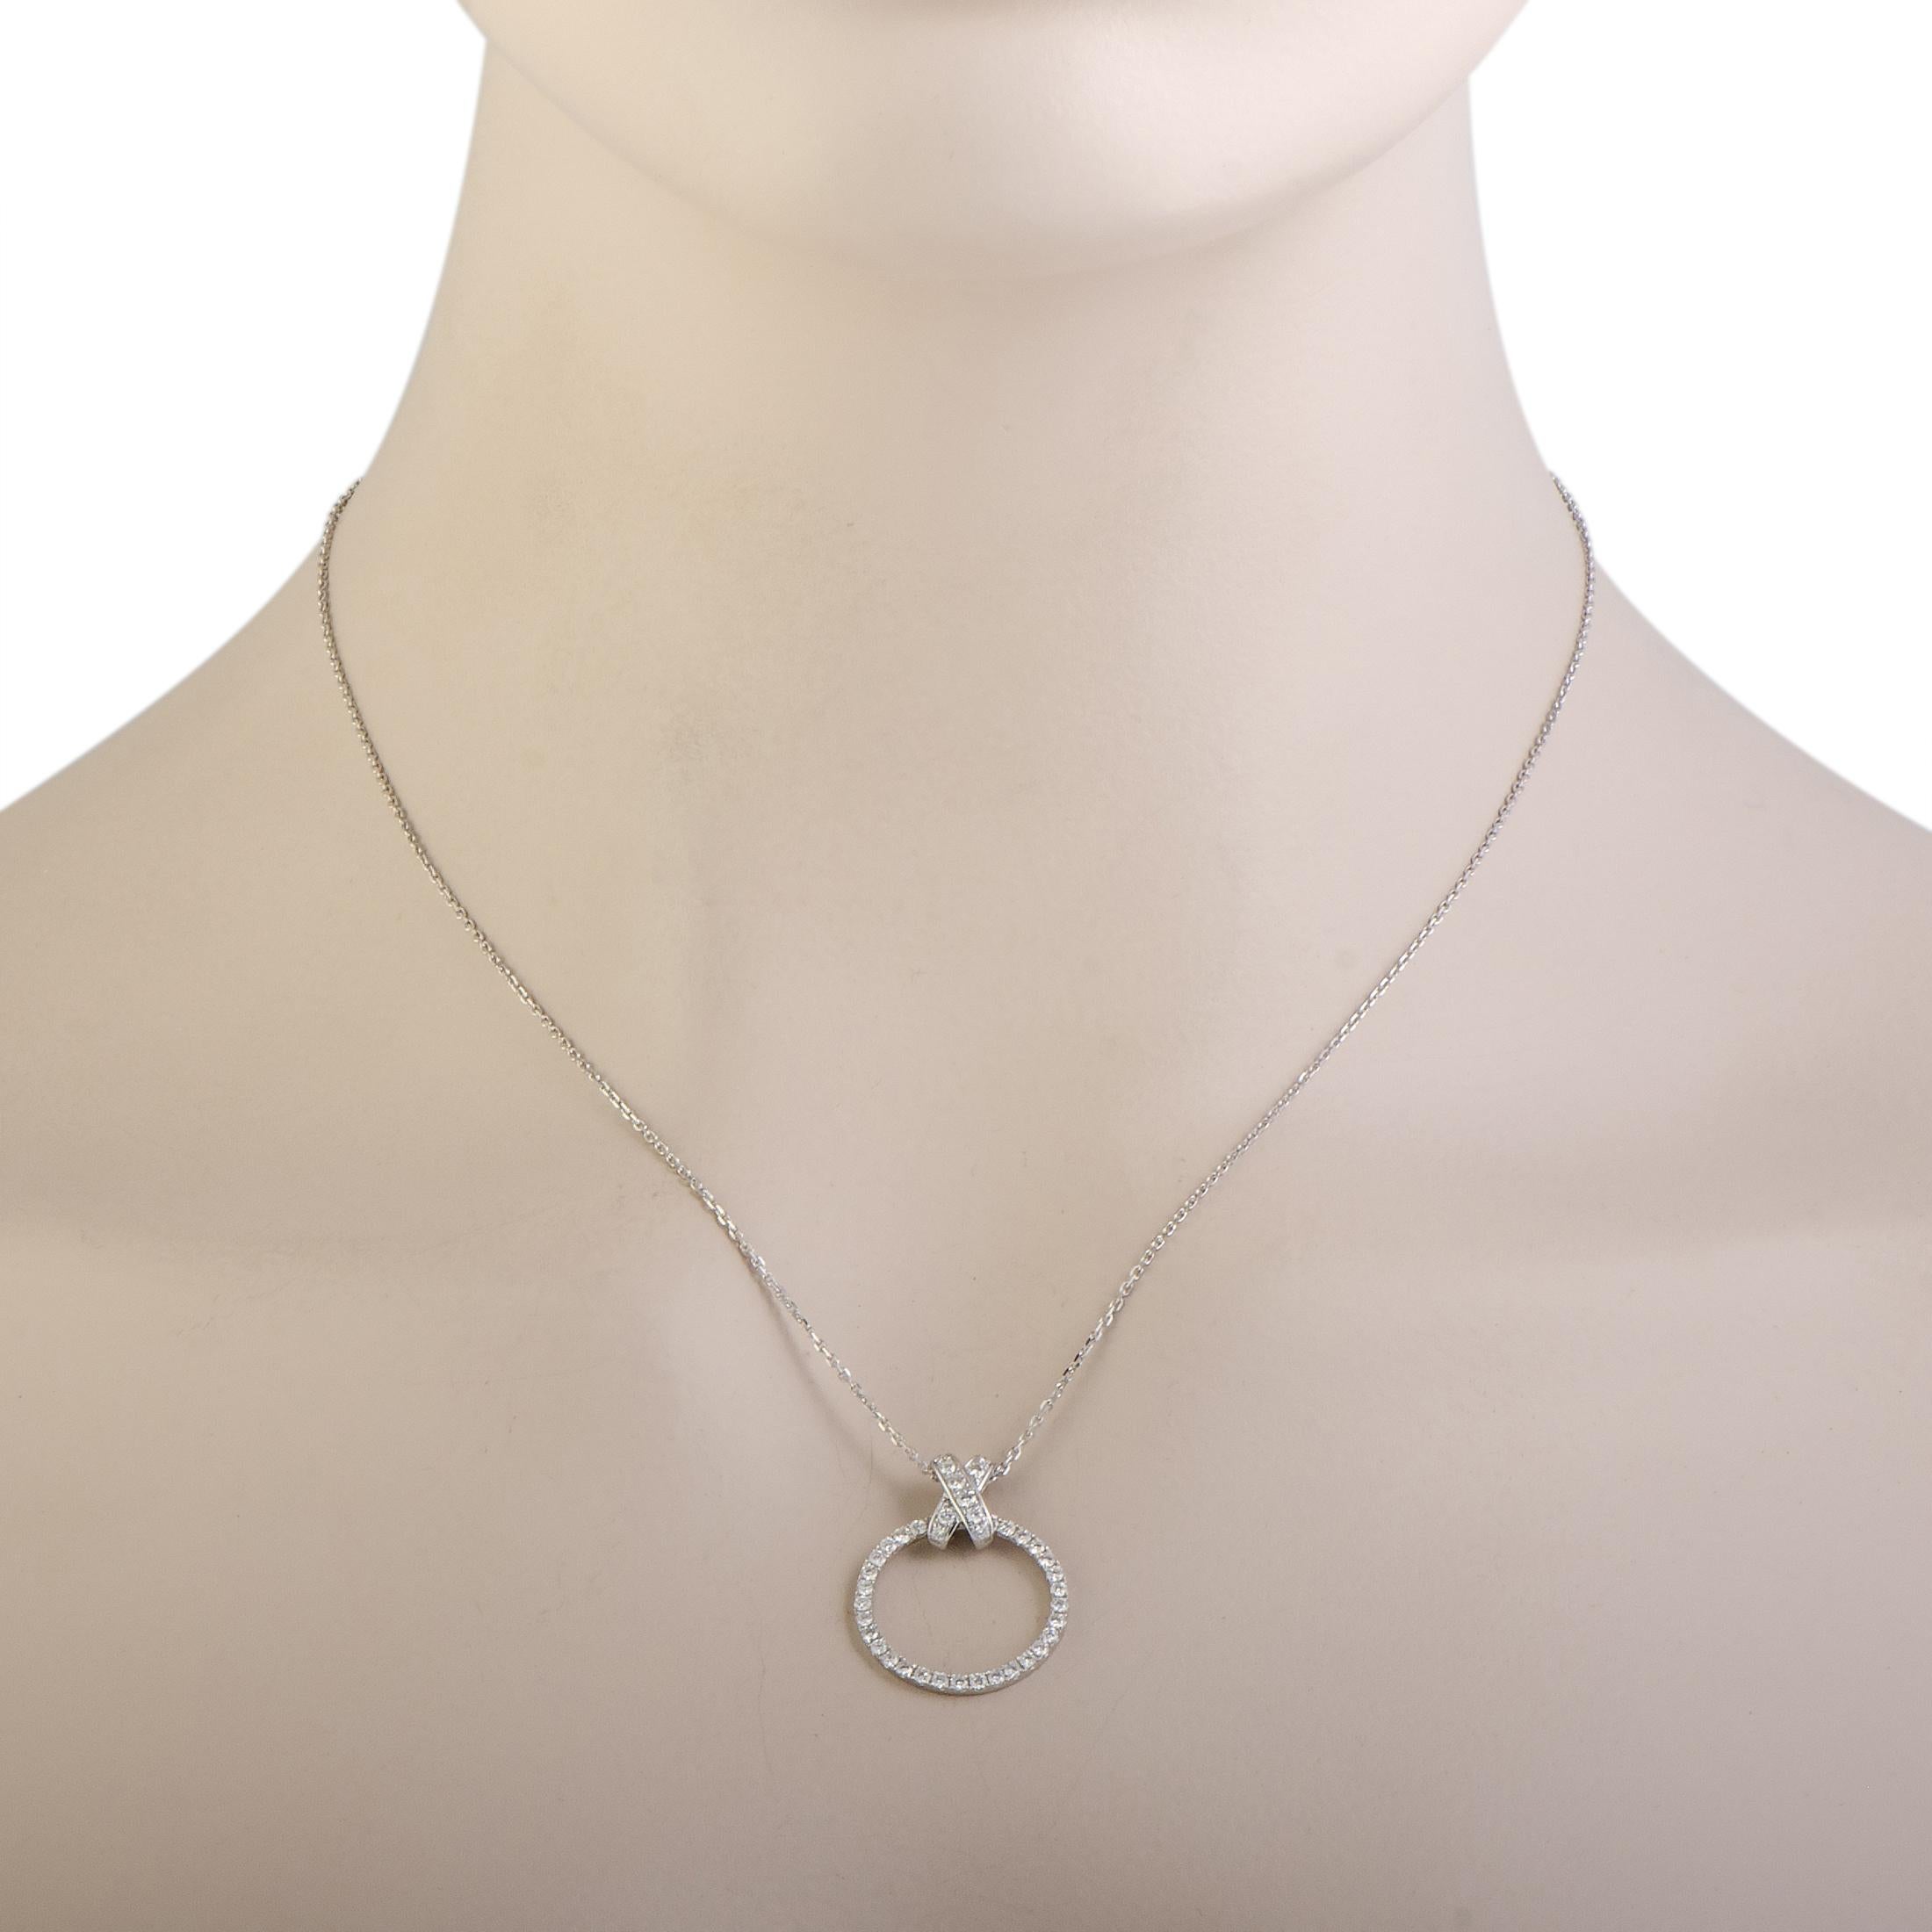 Designed in an exceptionally elegant manner and luxuriously decorated with lustrous gems, this beautiful necklace offers an incredibly classy appearance. The necklace is presented by Odelia and it is expertly crafted from 18K white gold, featuring a